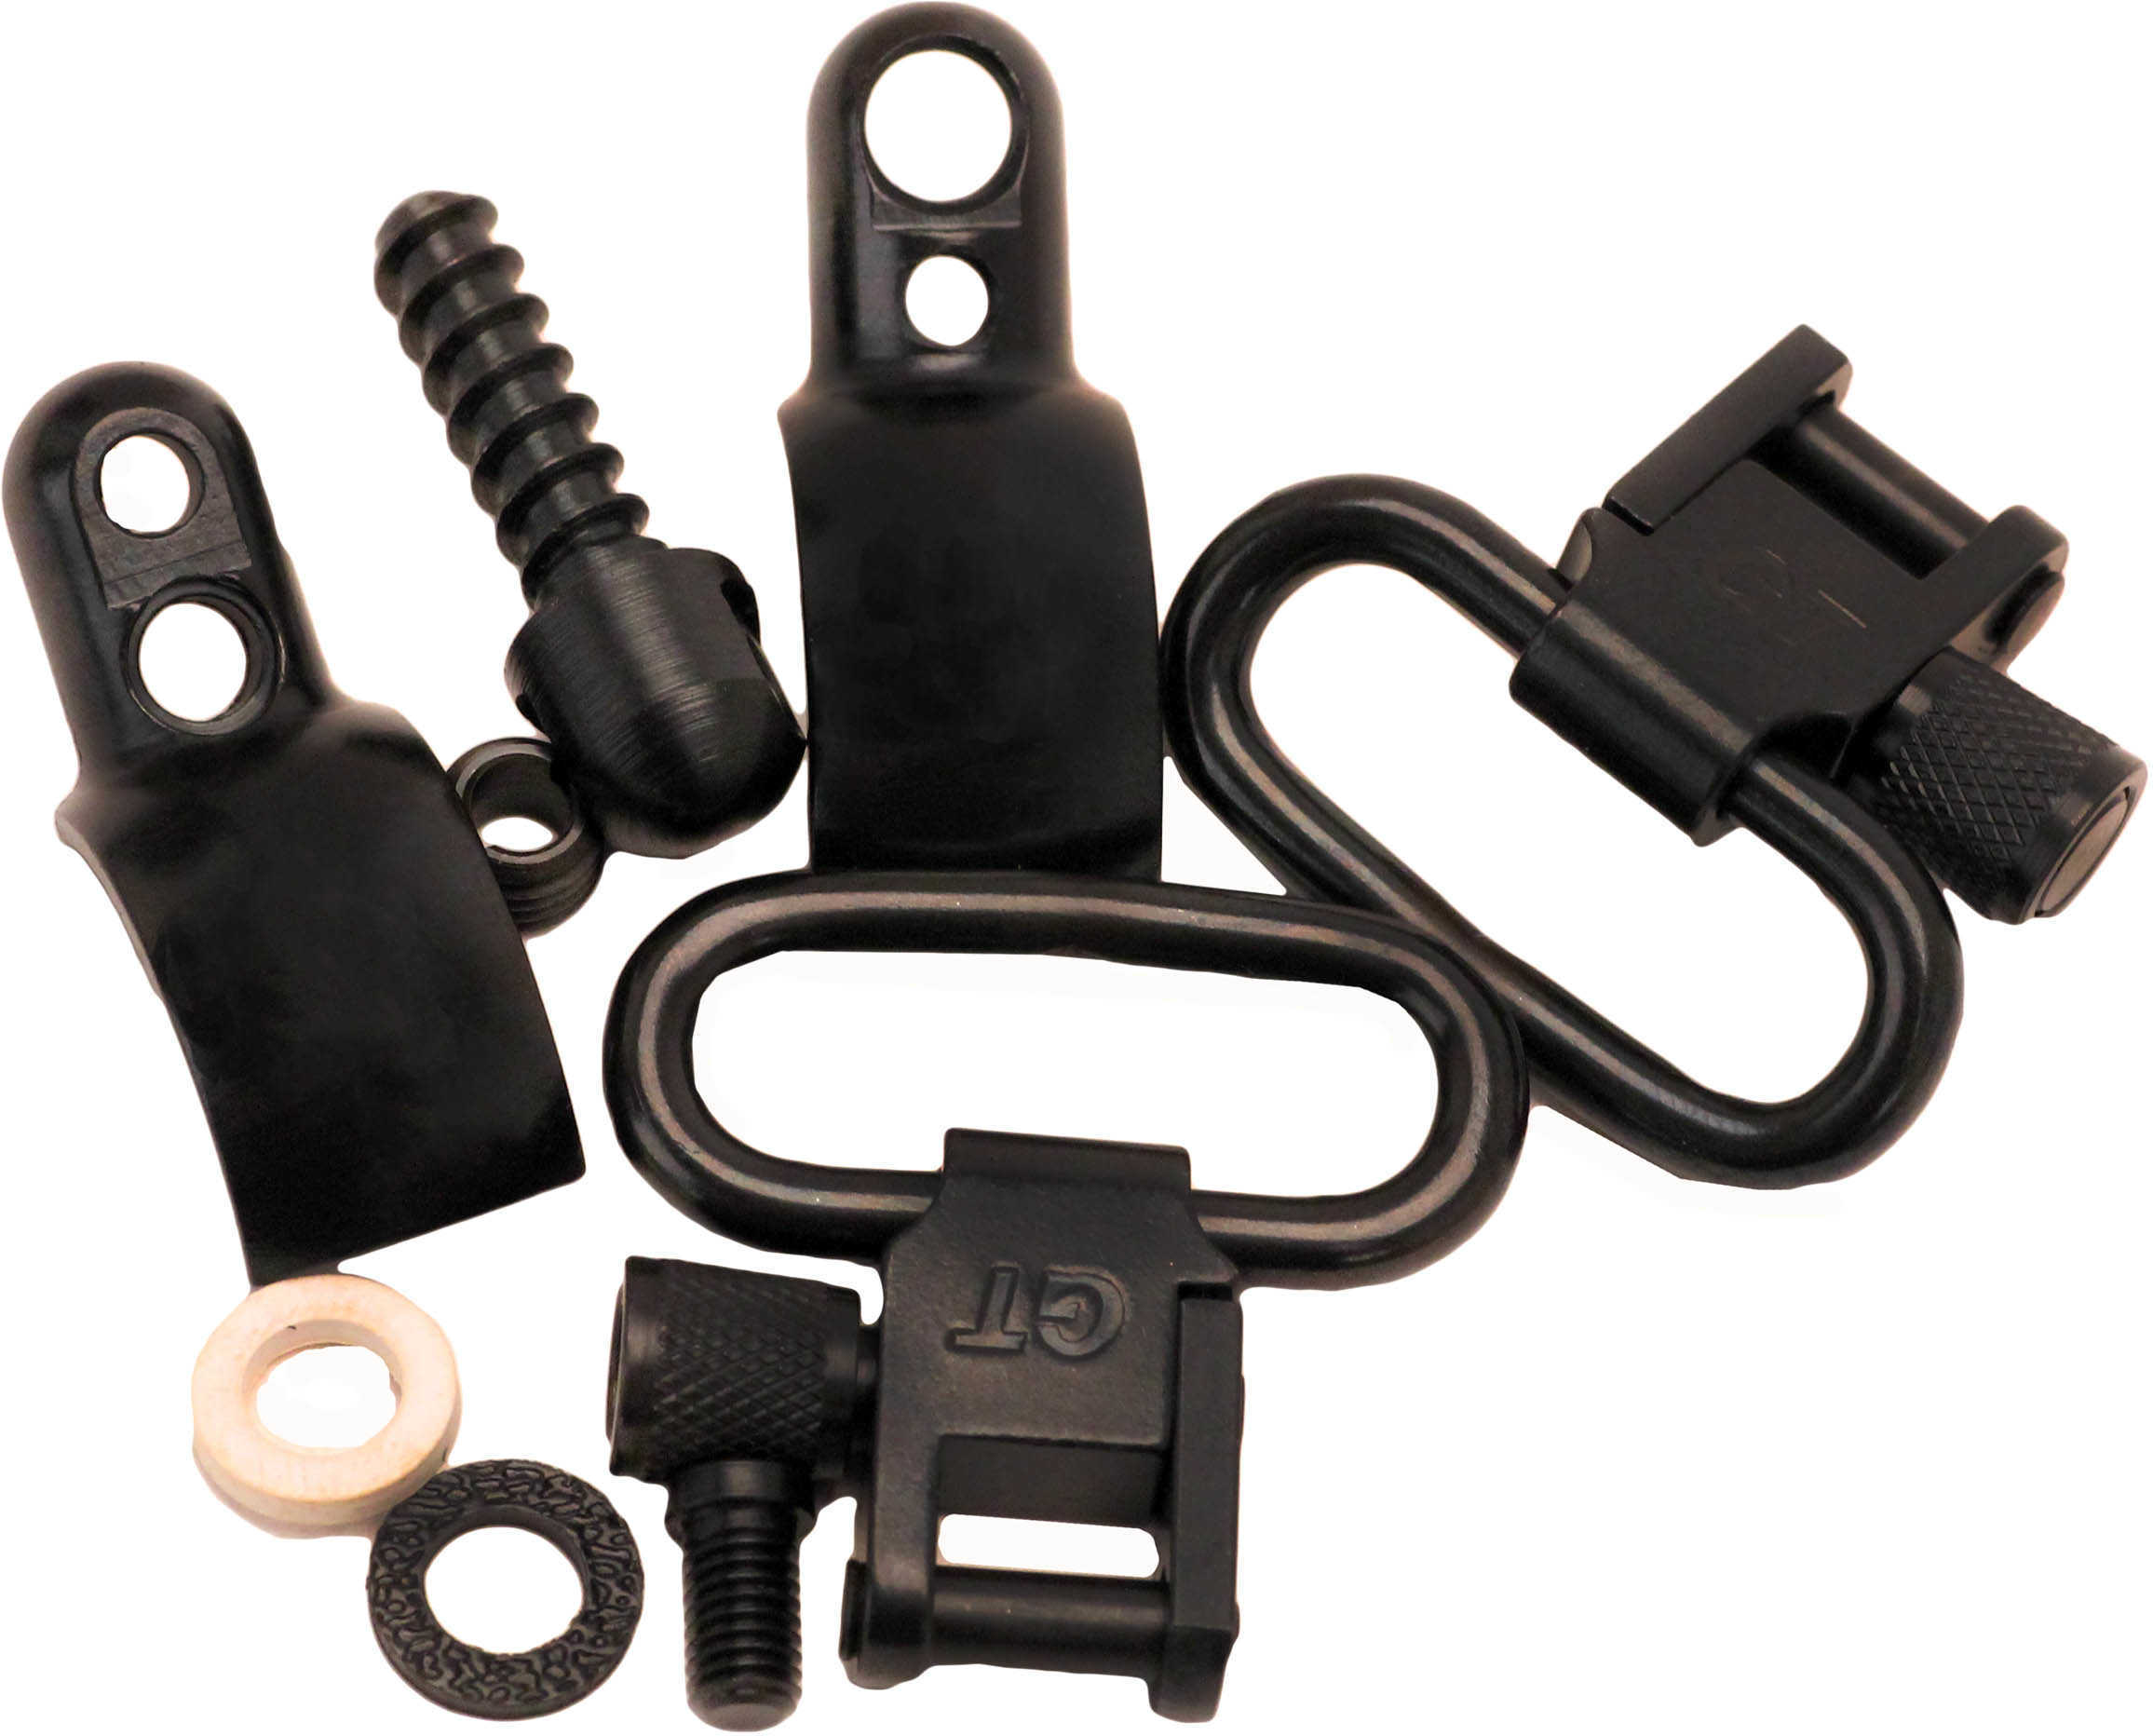 GrovTec Two Piece Band Swivels - .800" To .850" Diameter